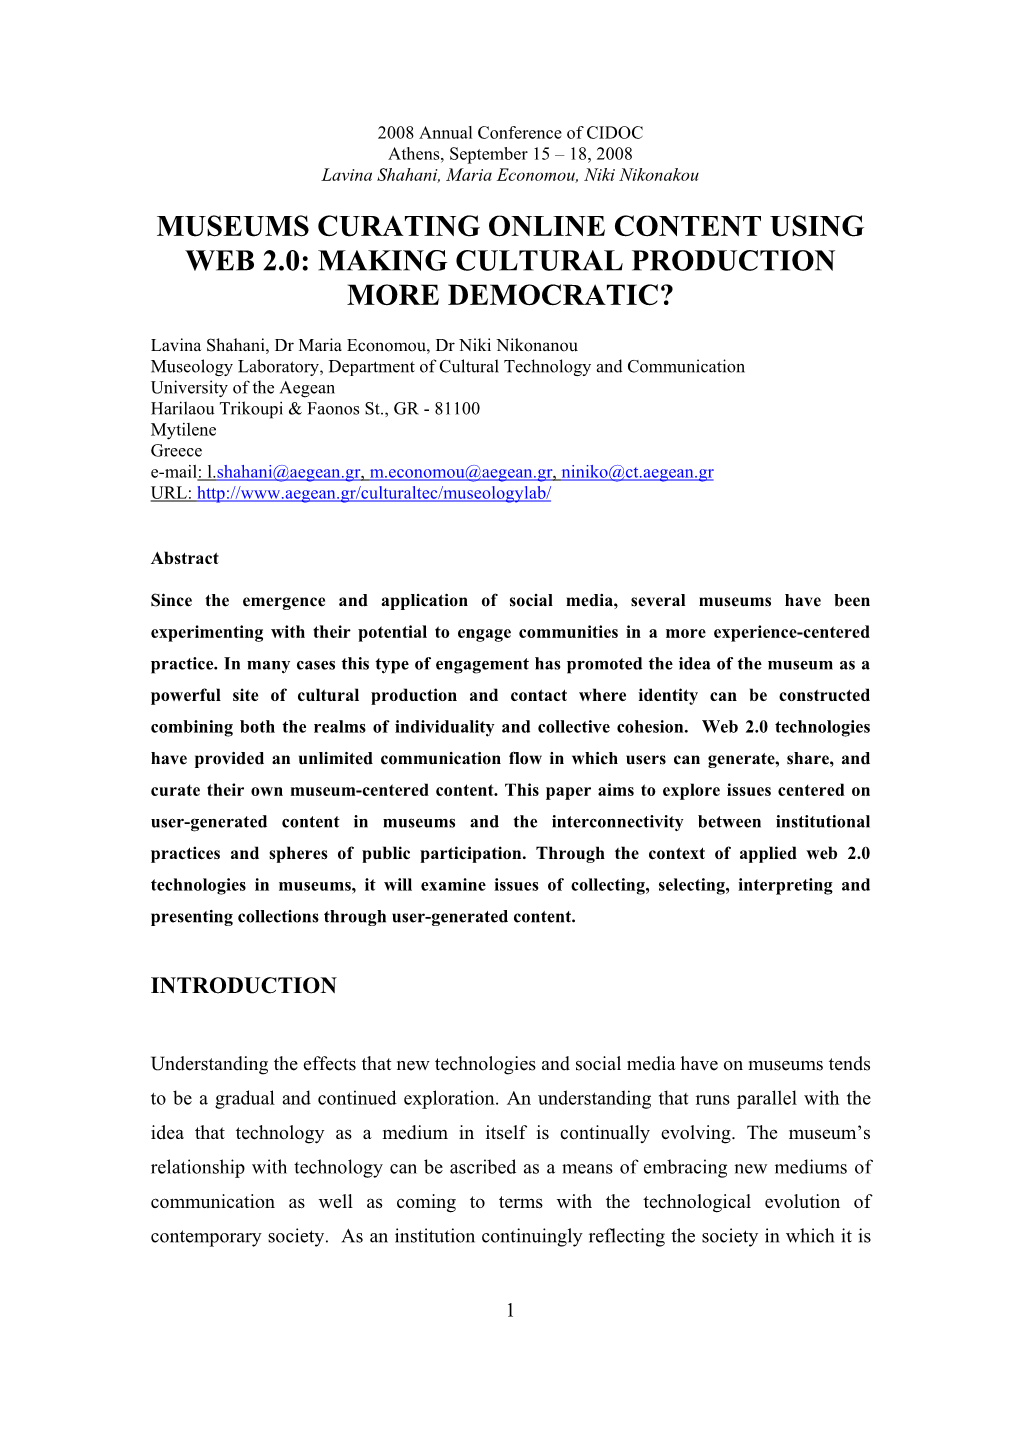 Museums Curating Online Content Using Web 2.0: Making Cultural Production More Democratic?